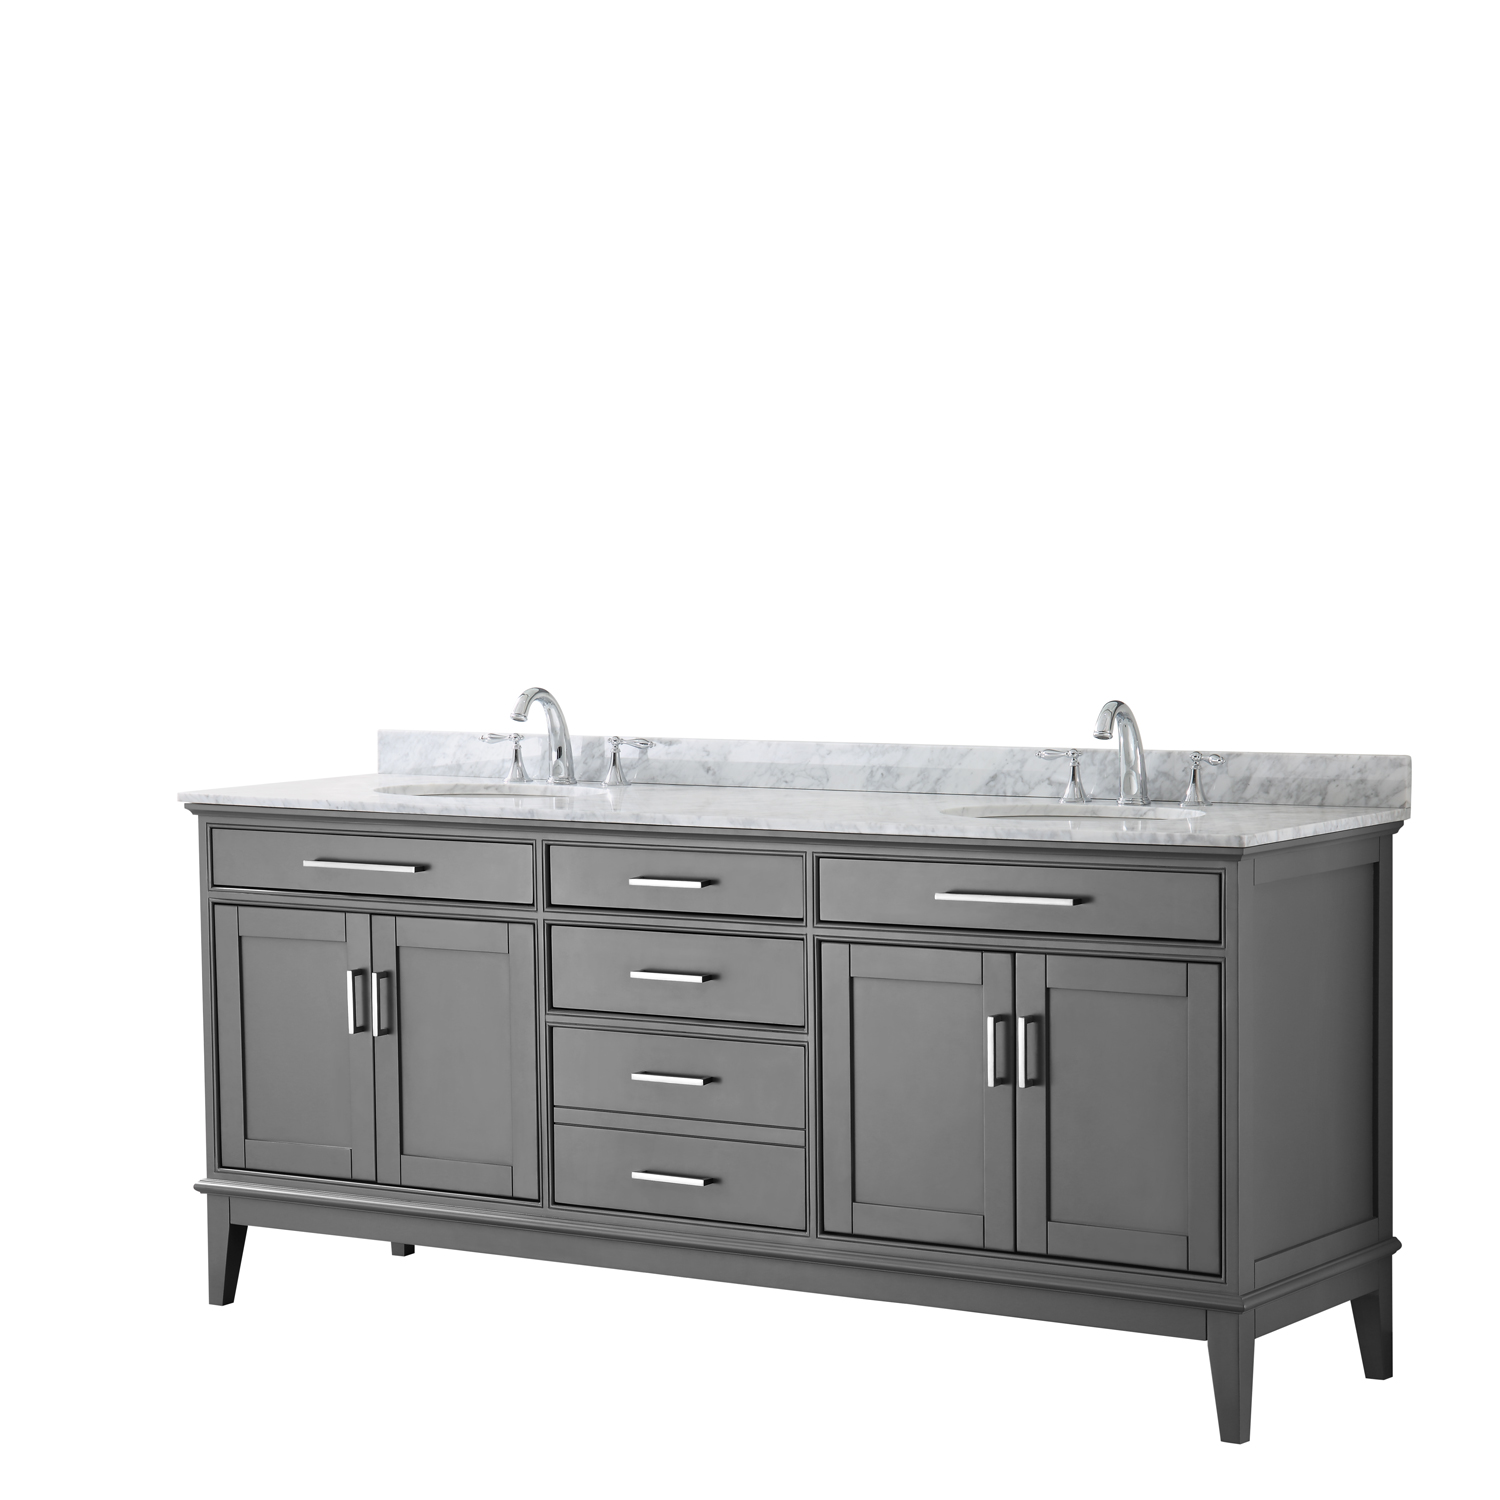 Contemporary 80" Double Bathroom Vanity in Dark Gray, White Carrara Marble Countertop with Undermount Sinks, and Mirror Options